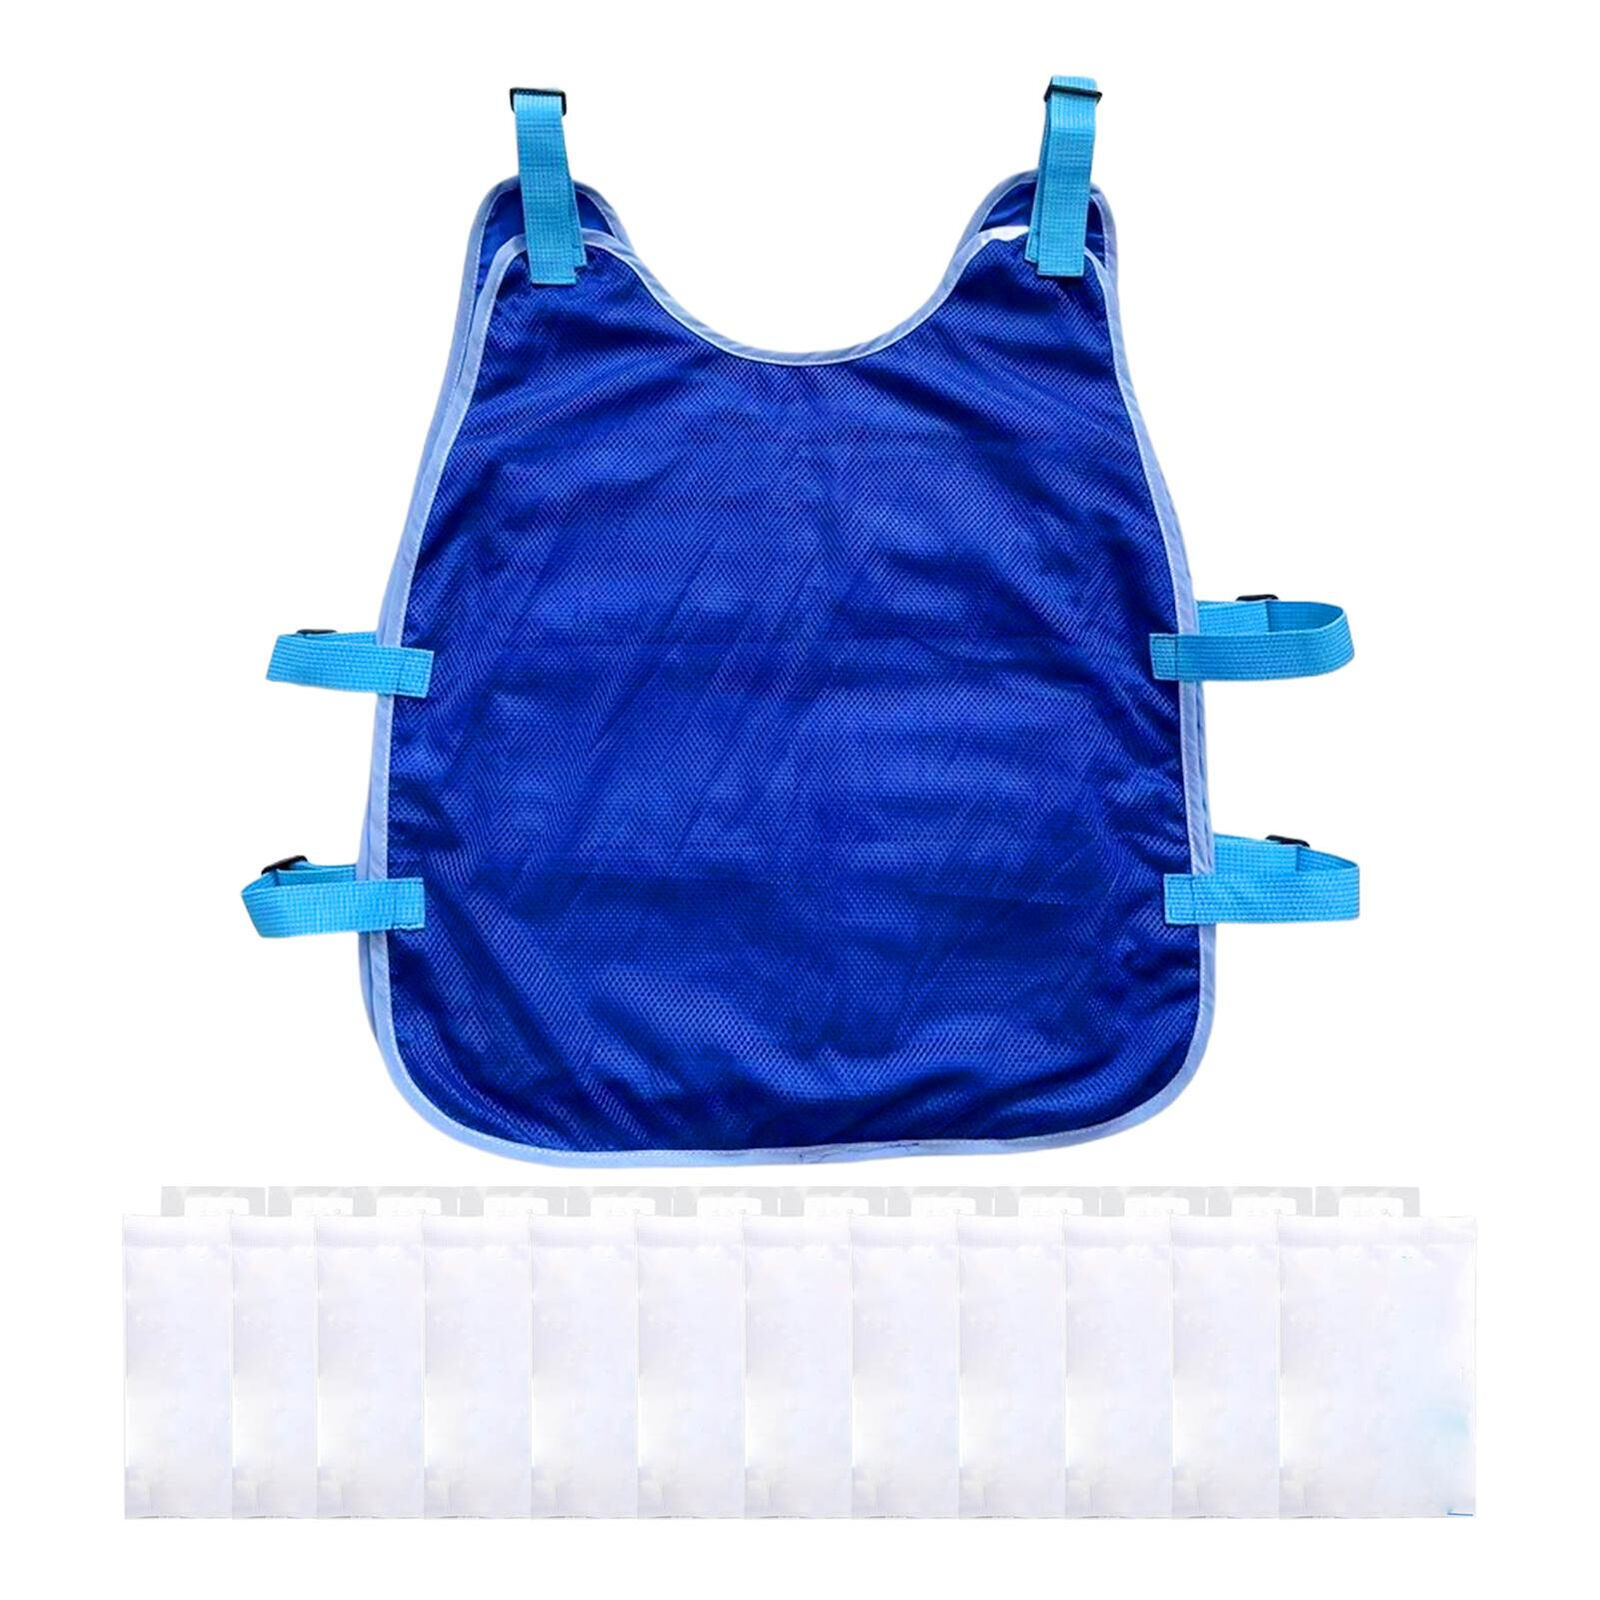 Cooling Safety Vest With 24 Ice Packs - Reflective Vest With Pockets And Zipper